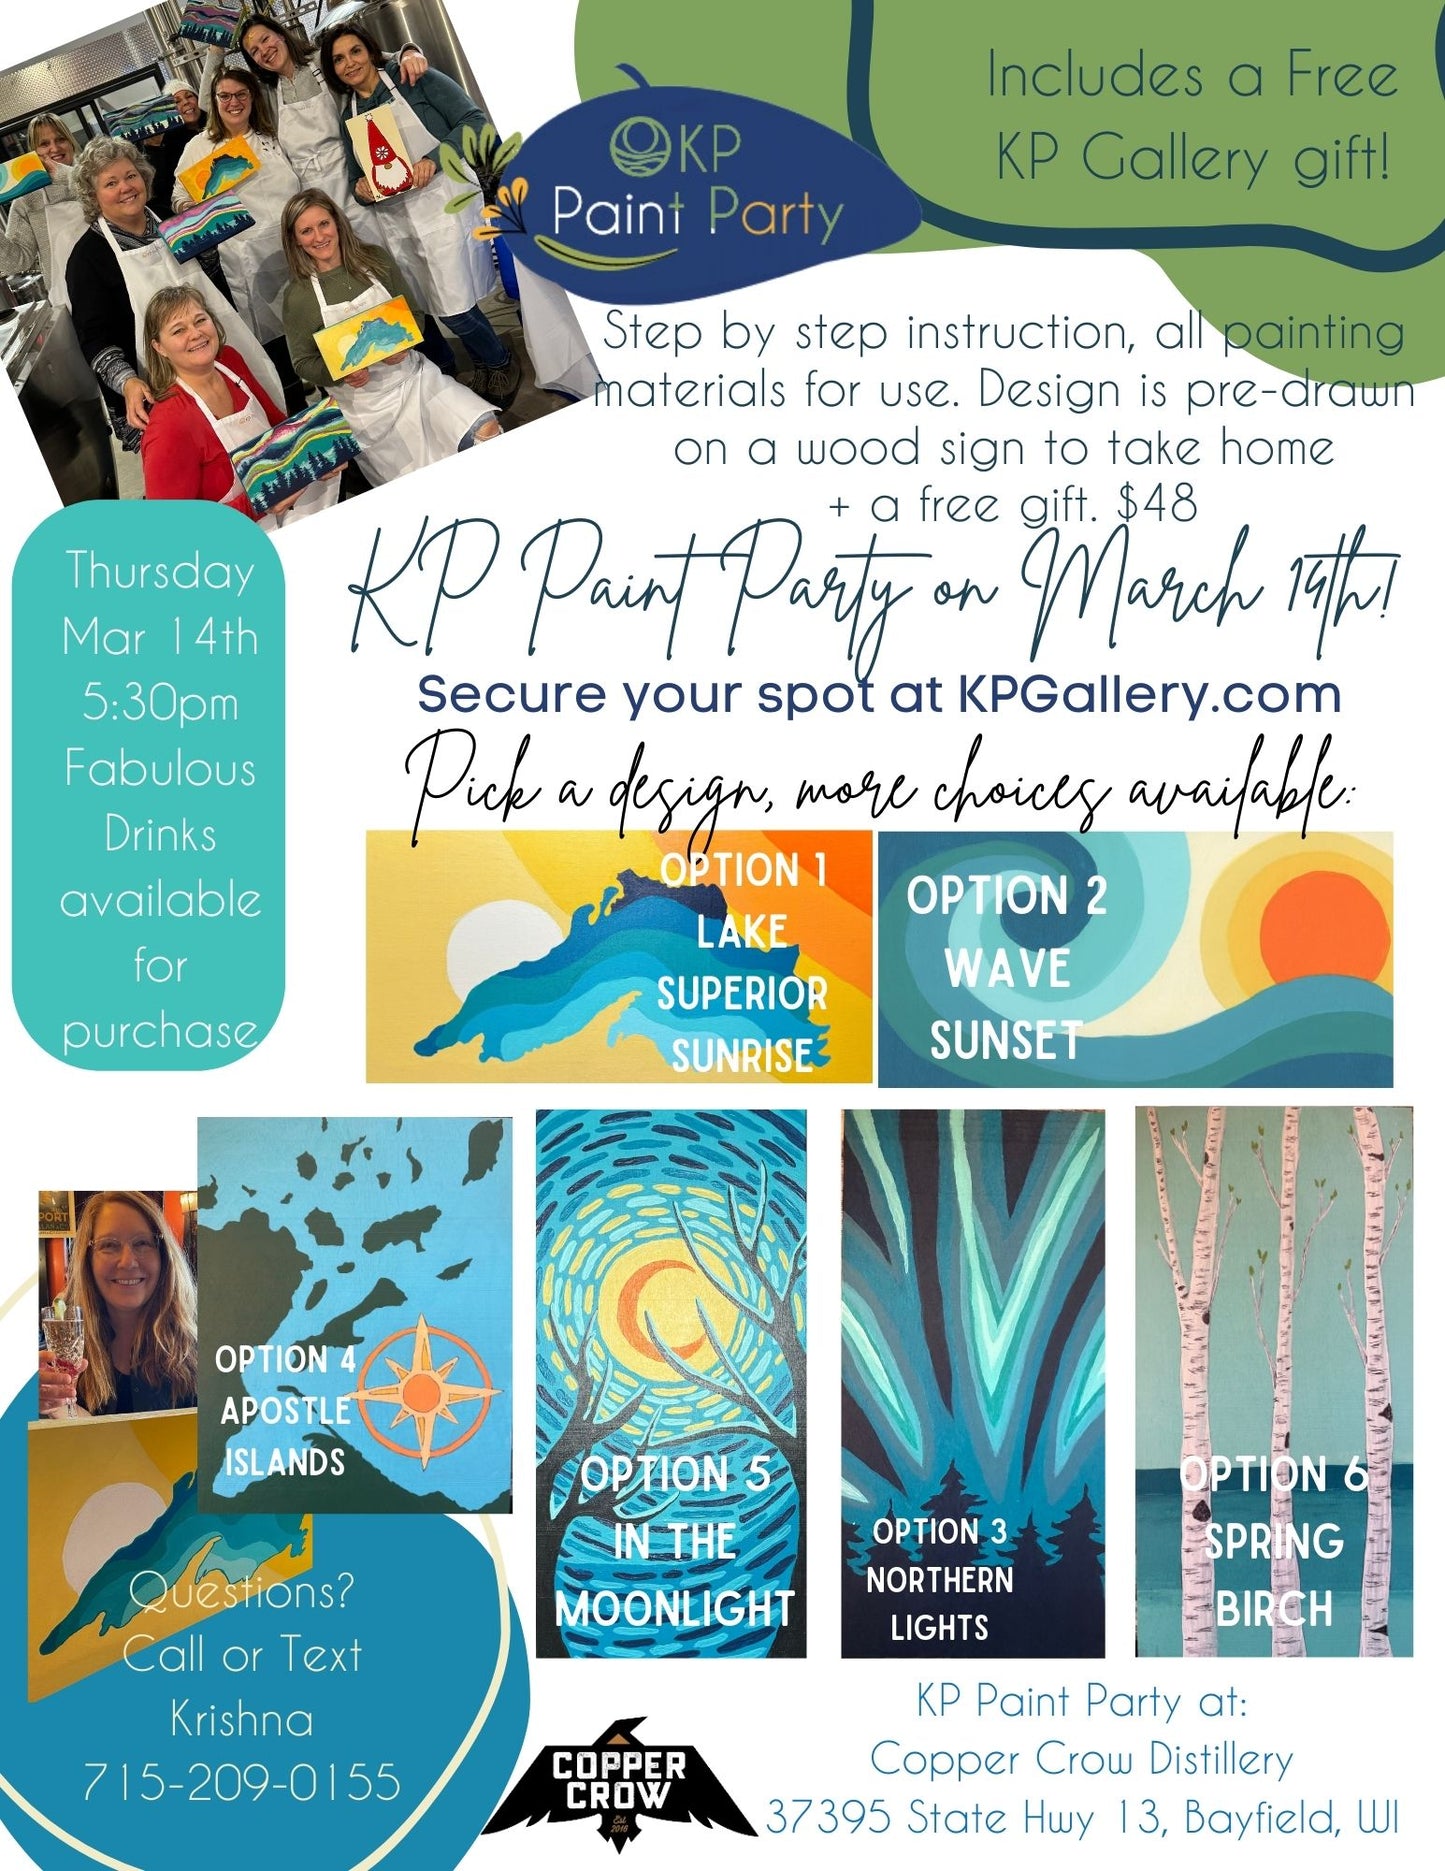 March 14th! Choose your Design KP Paint Party at the Copper Crow